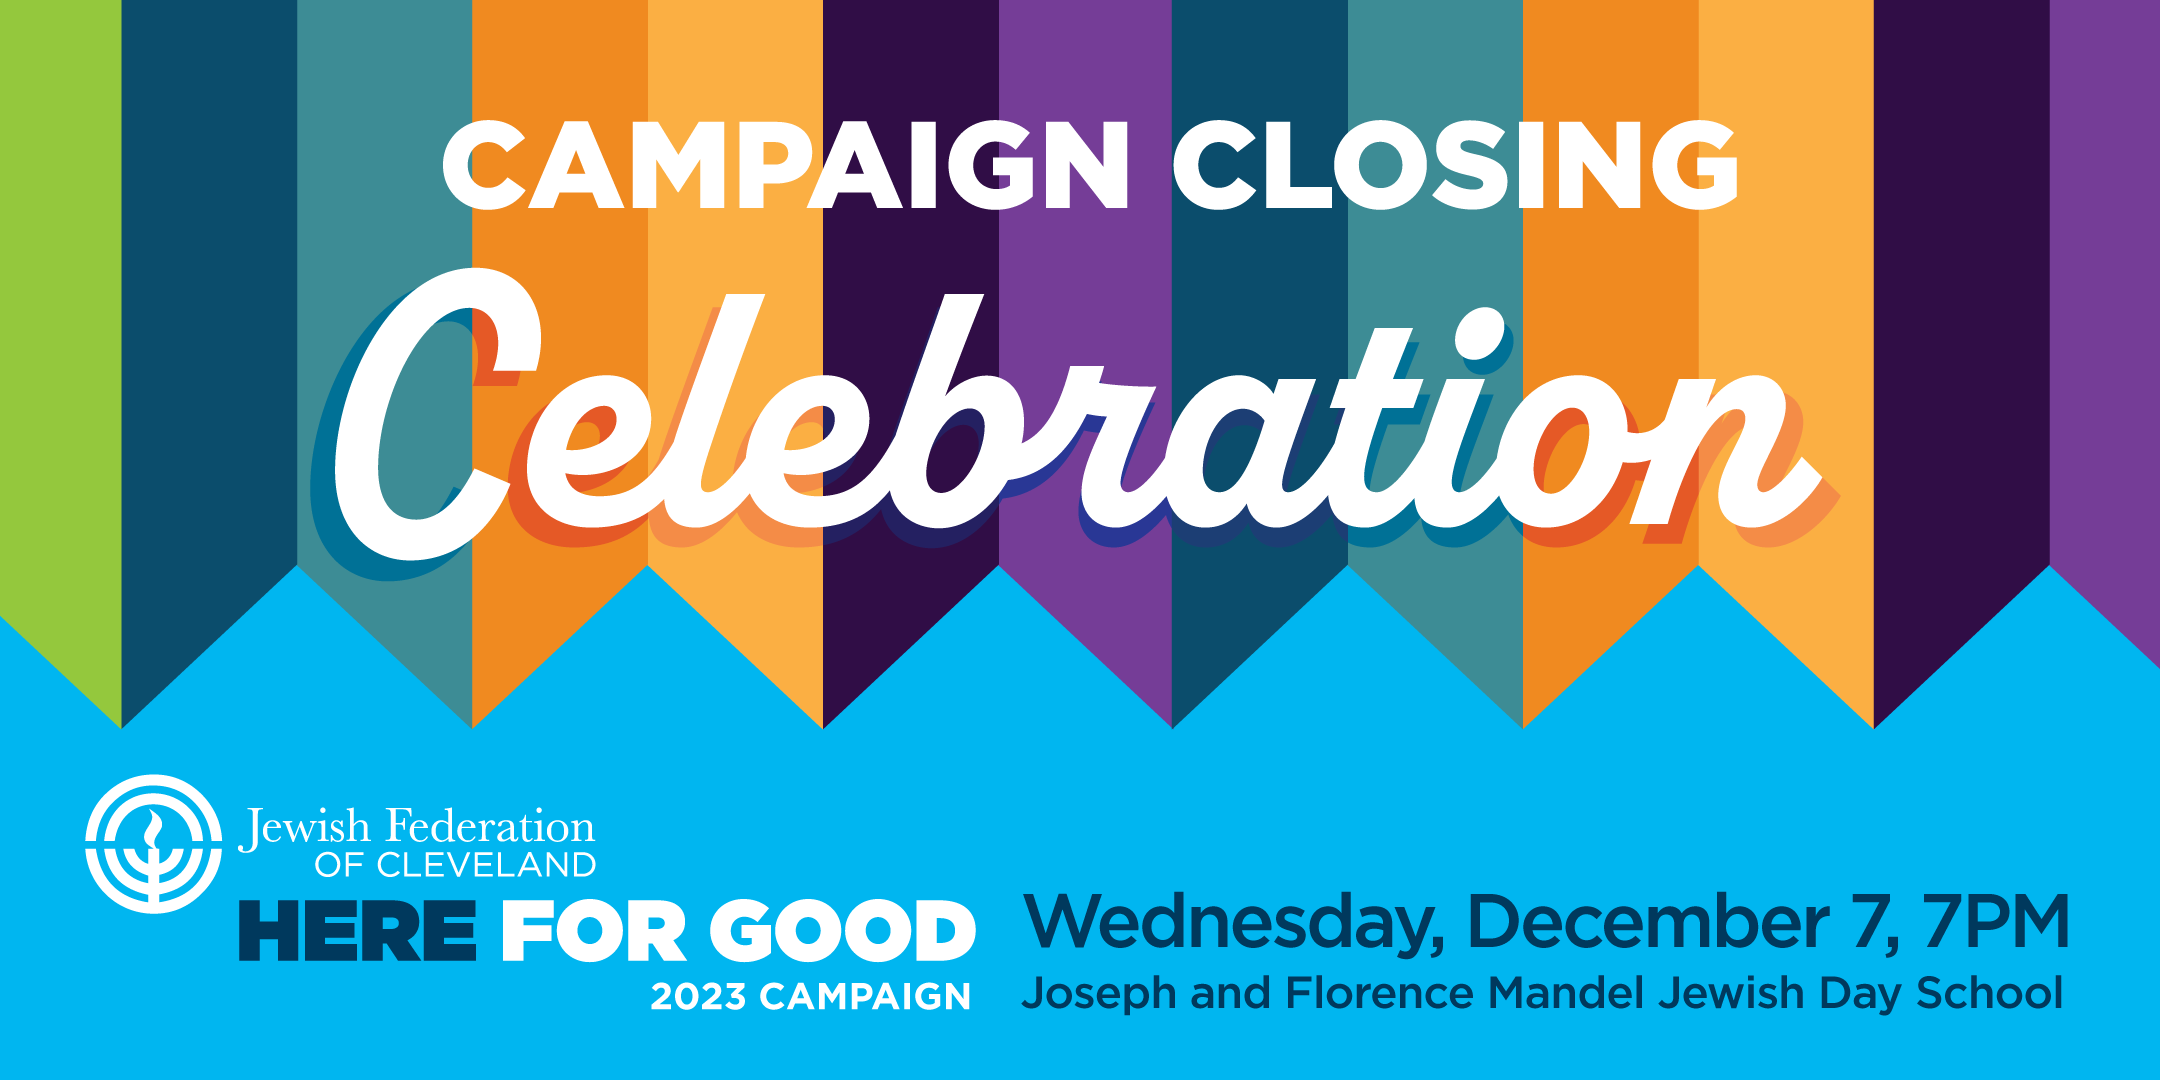 Federation to Hold 2023 Campaign for Jewish Needs Campaign Closing Celebration Event on December 7